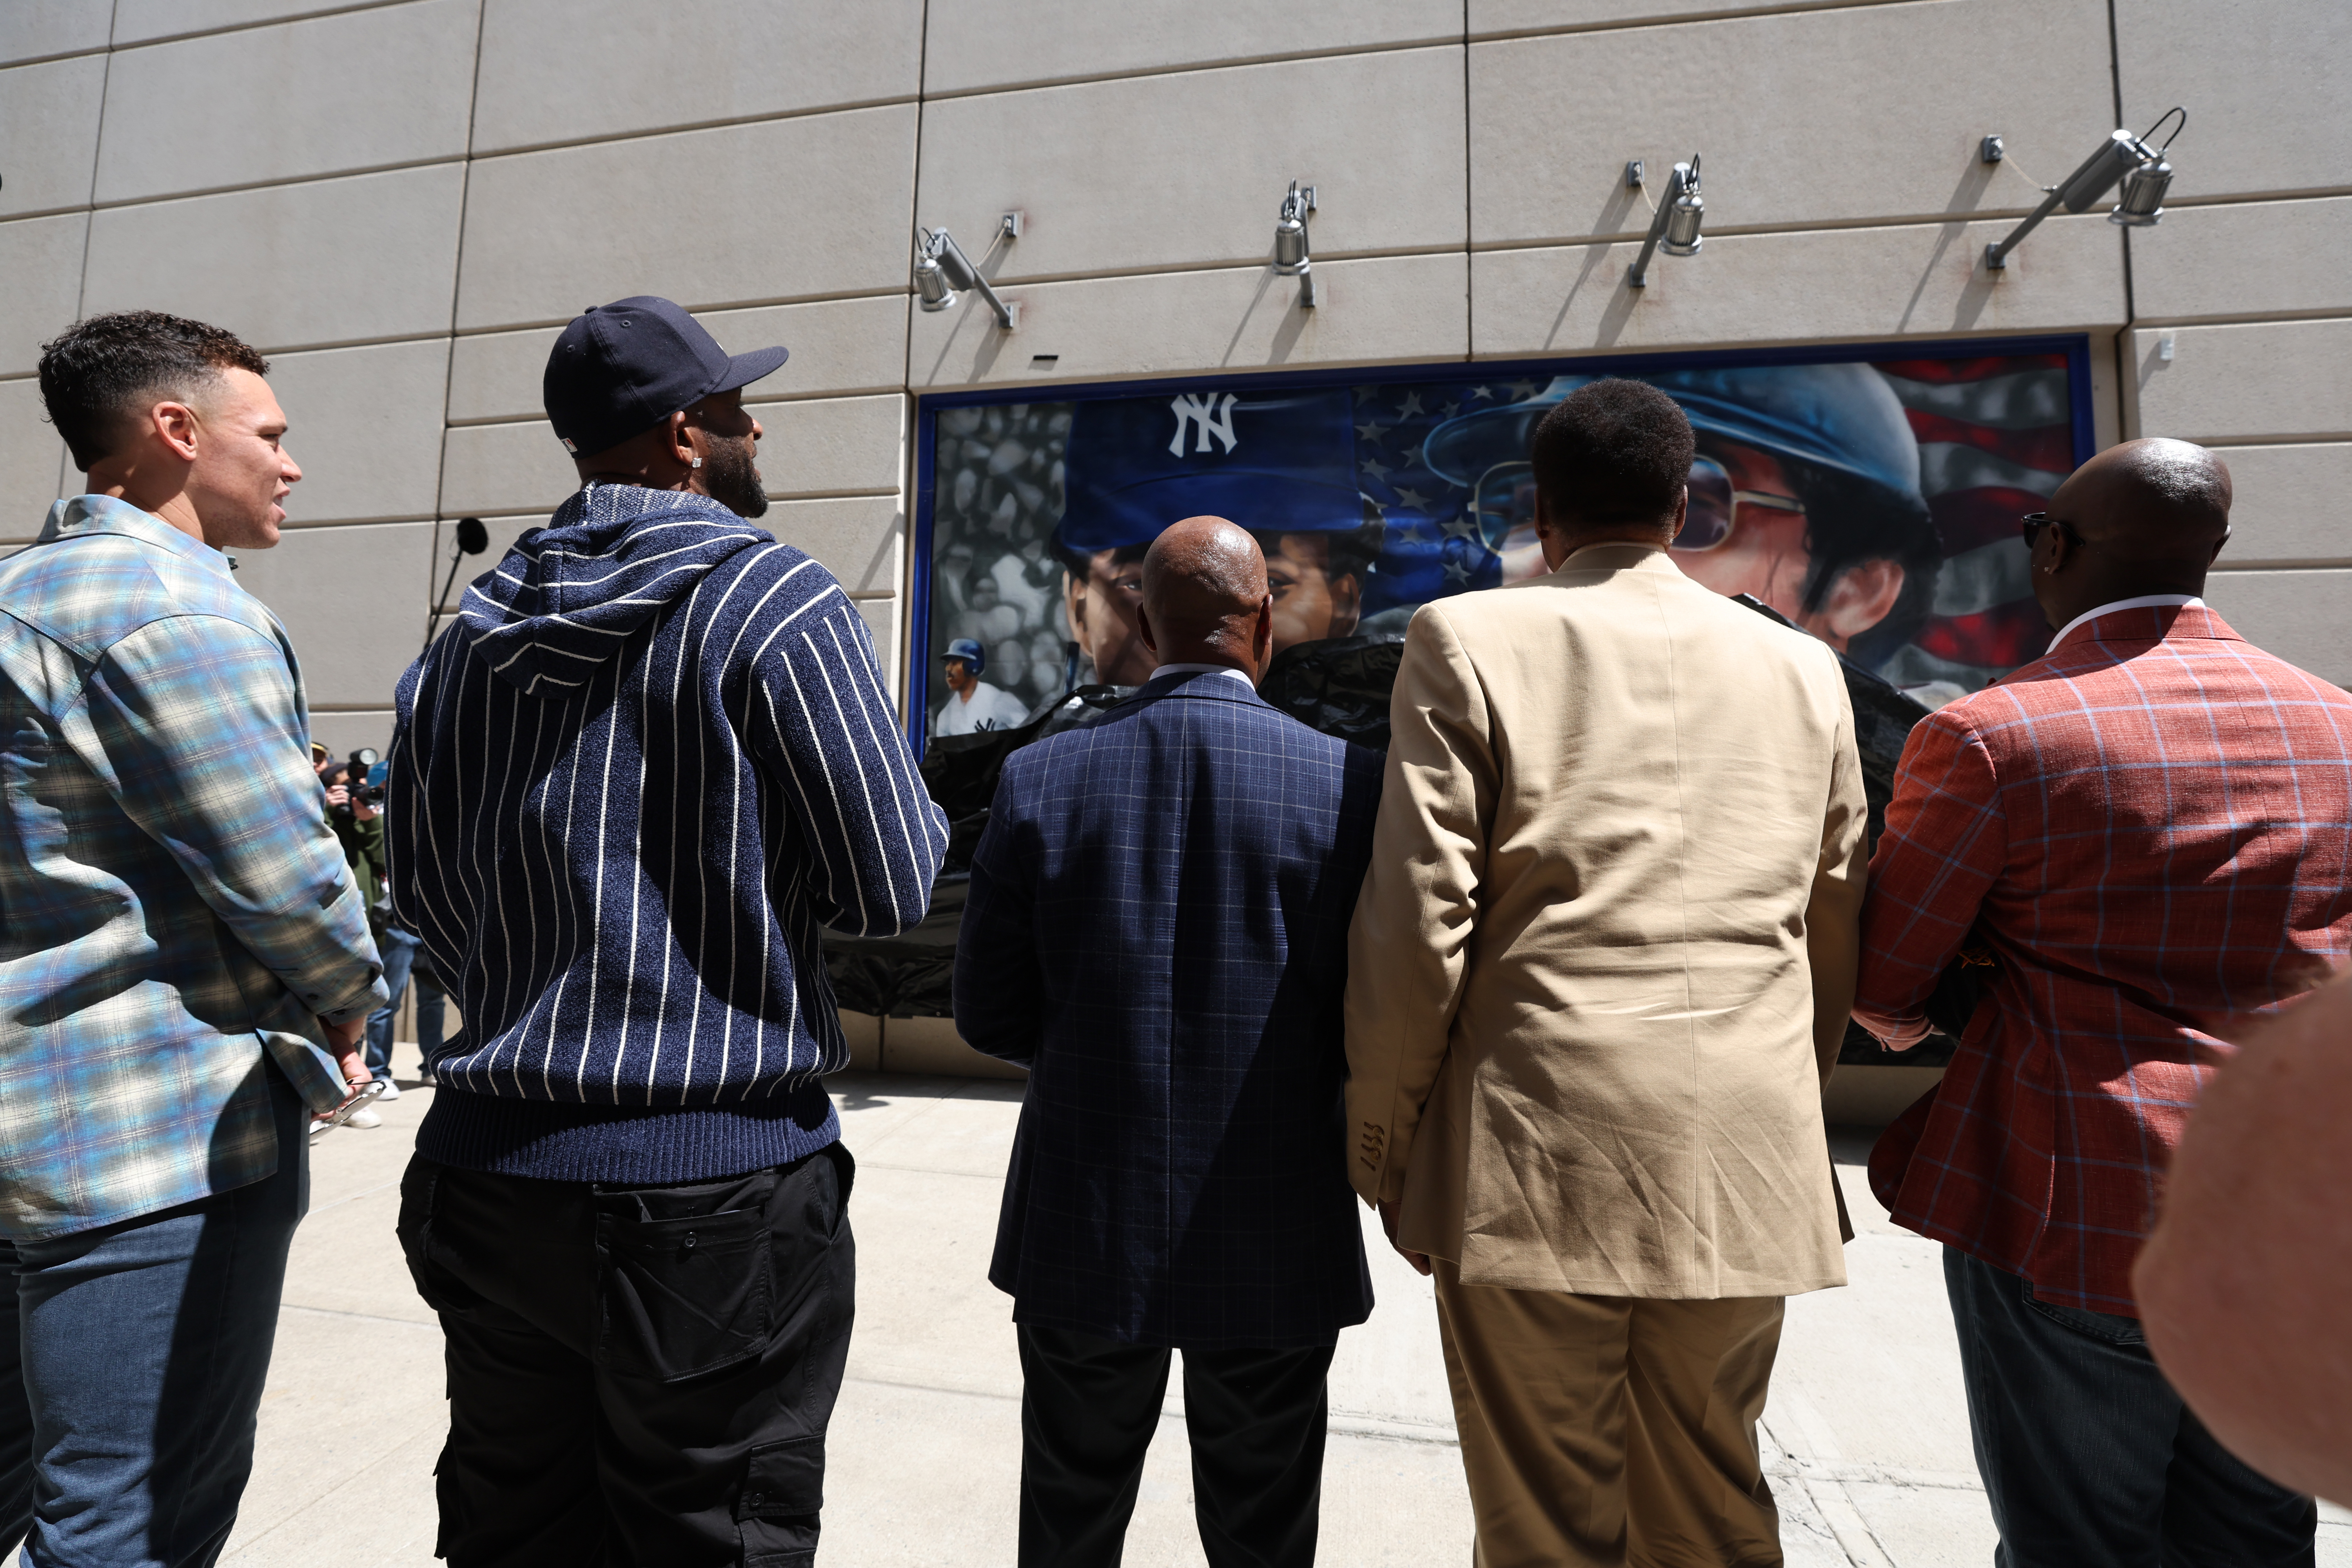 Aaron Judge, CC Sabathia, Willie Randolph, Dave Winfield and Mike Cameron looking at one of the murals.